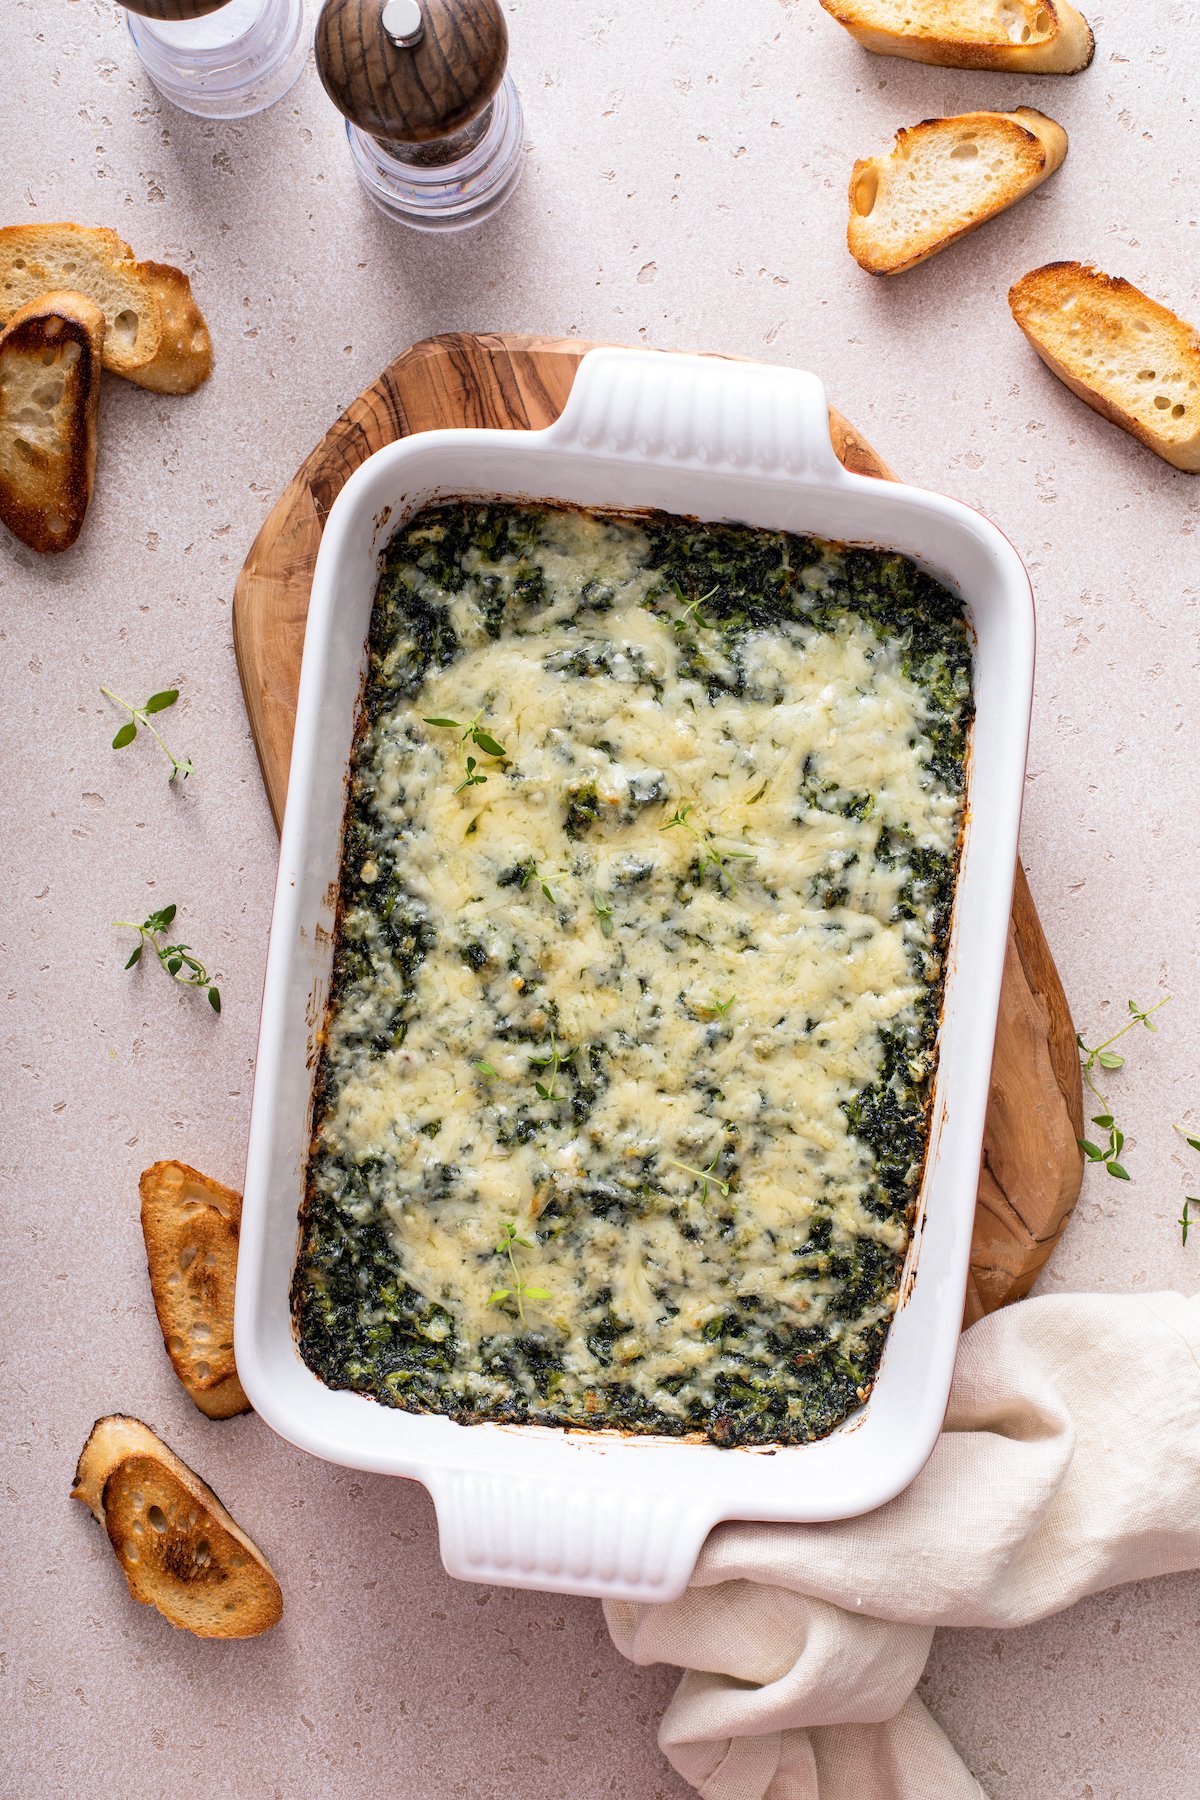 A baking dish filled with cheesy spinach casserole on a cutting board with a tea towel.